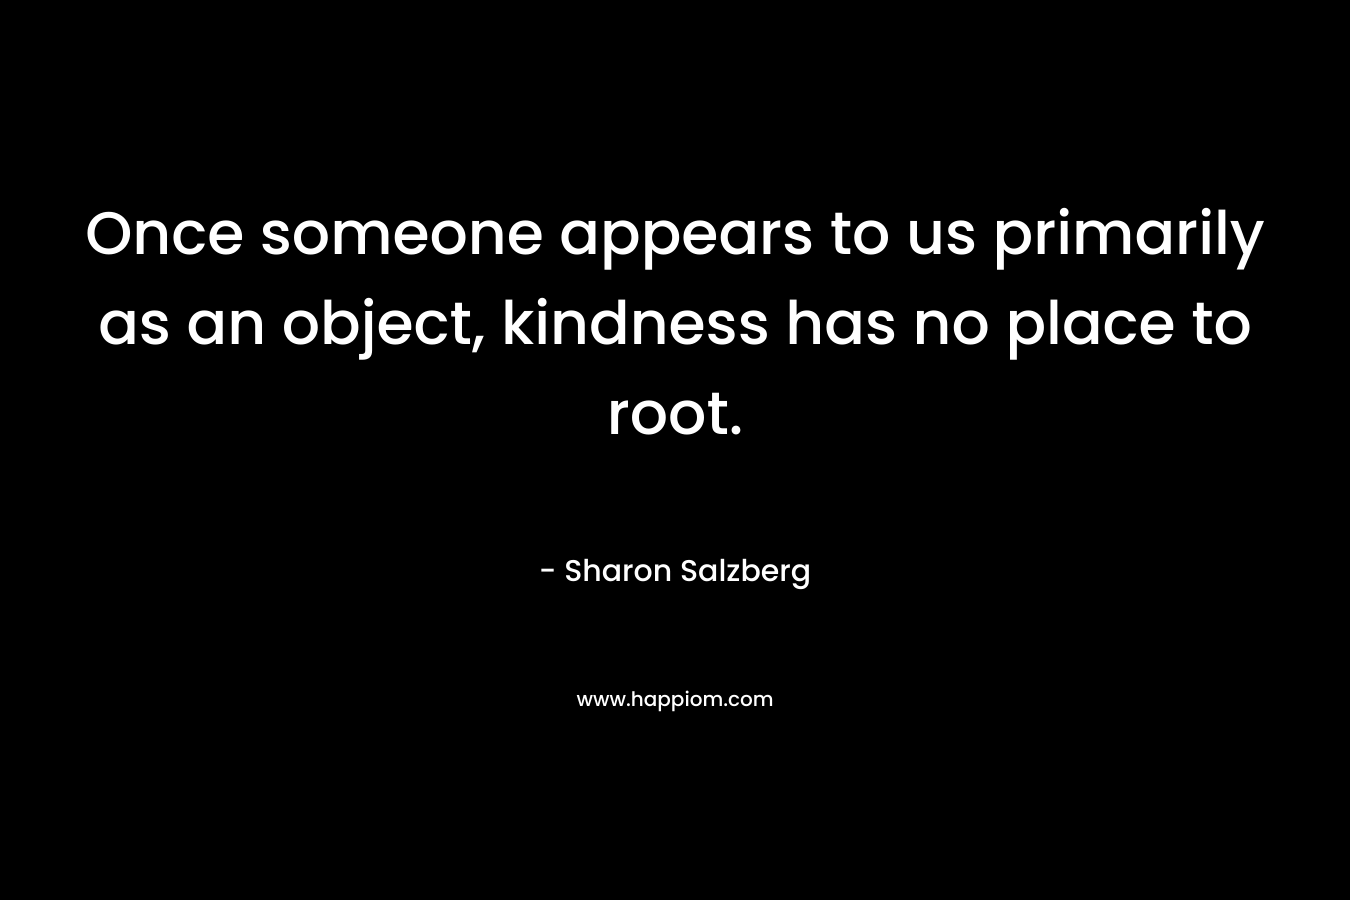 Once someone appears to us primarily as an object, kindness has no place to root.